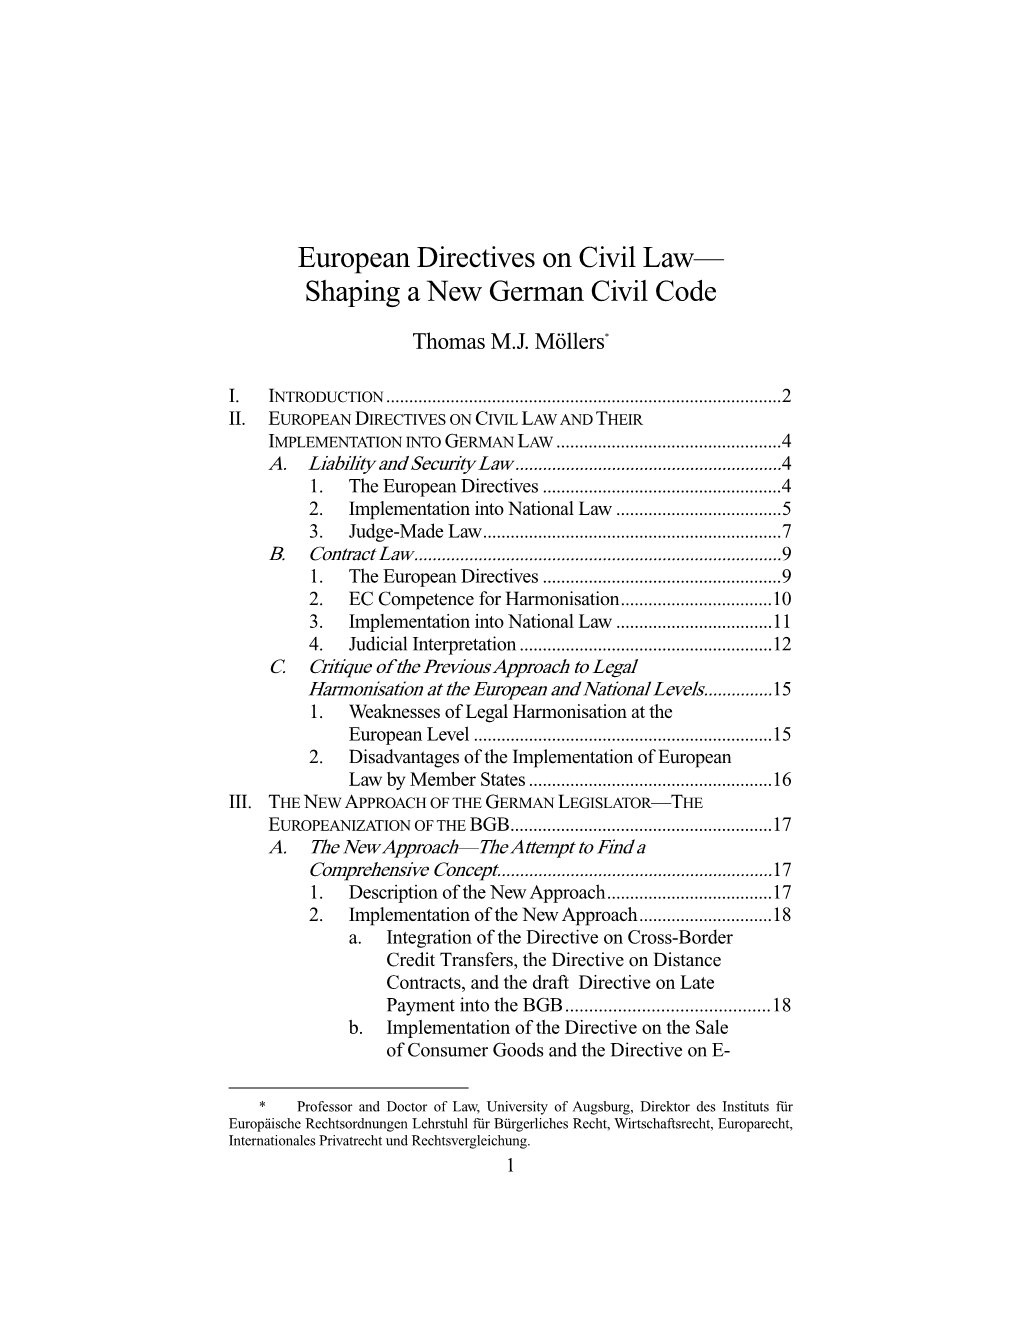 European Directives on Civil Law— Shaping a New German Civil Code